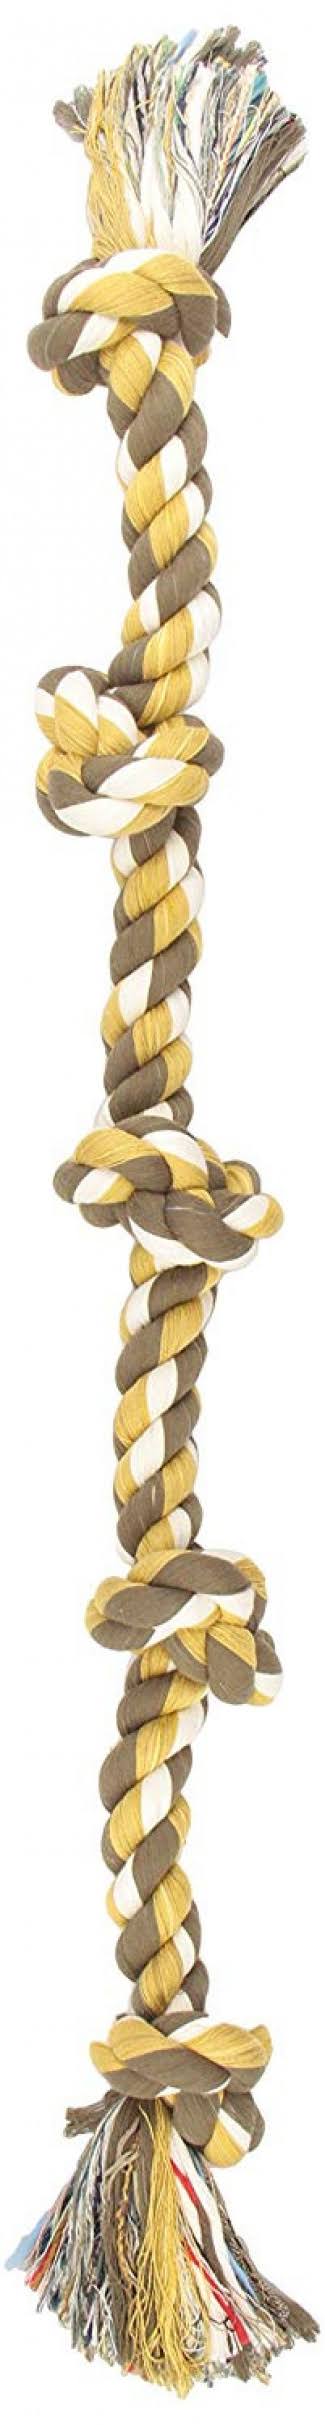 Mammoth Flossy Chews 5-Knot Tug Rope Toy - XL